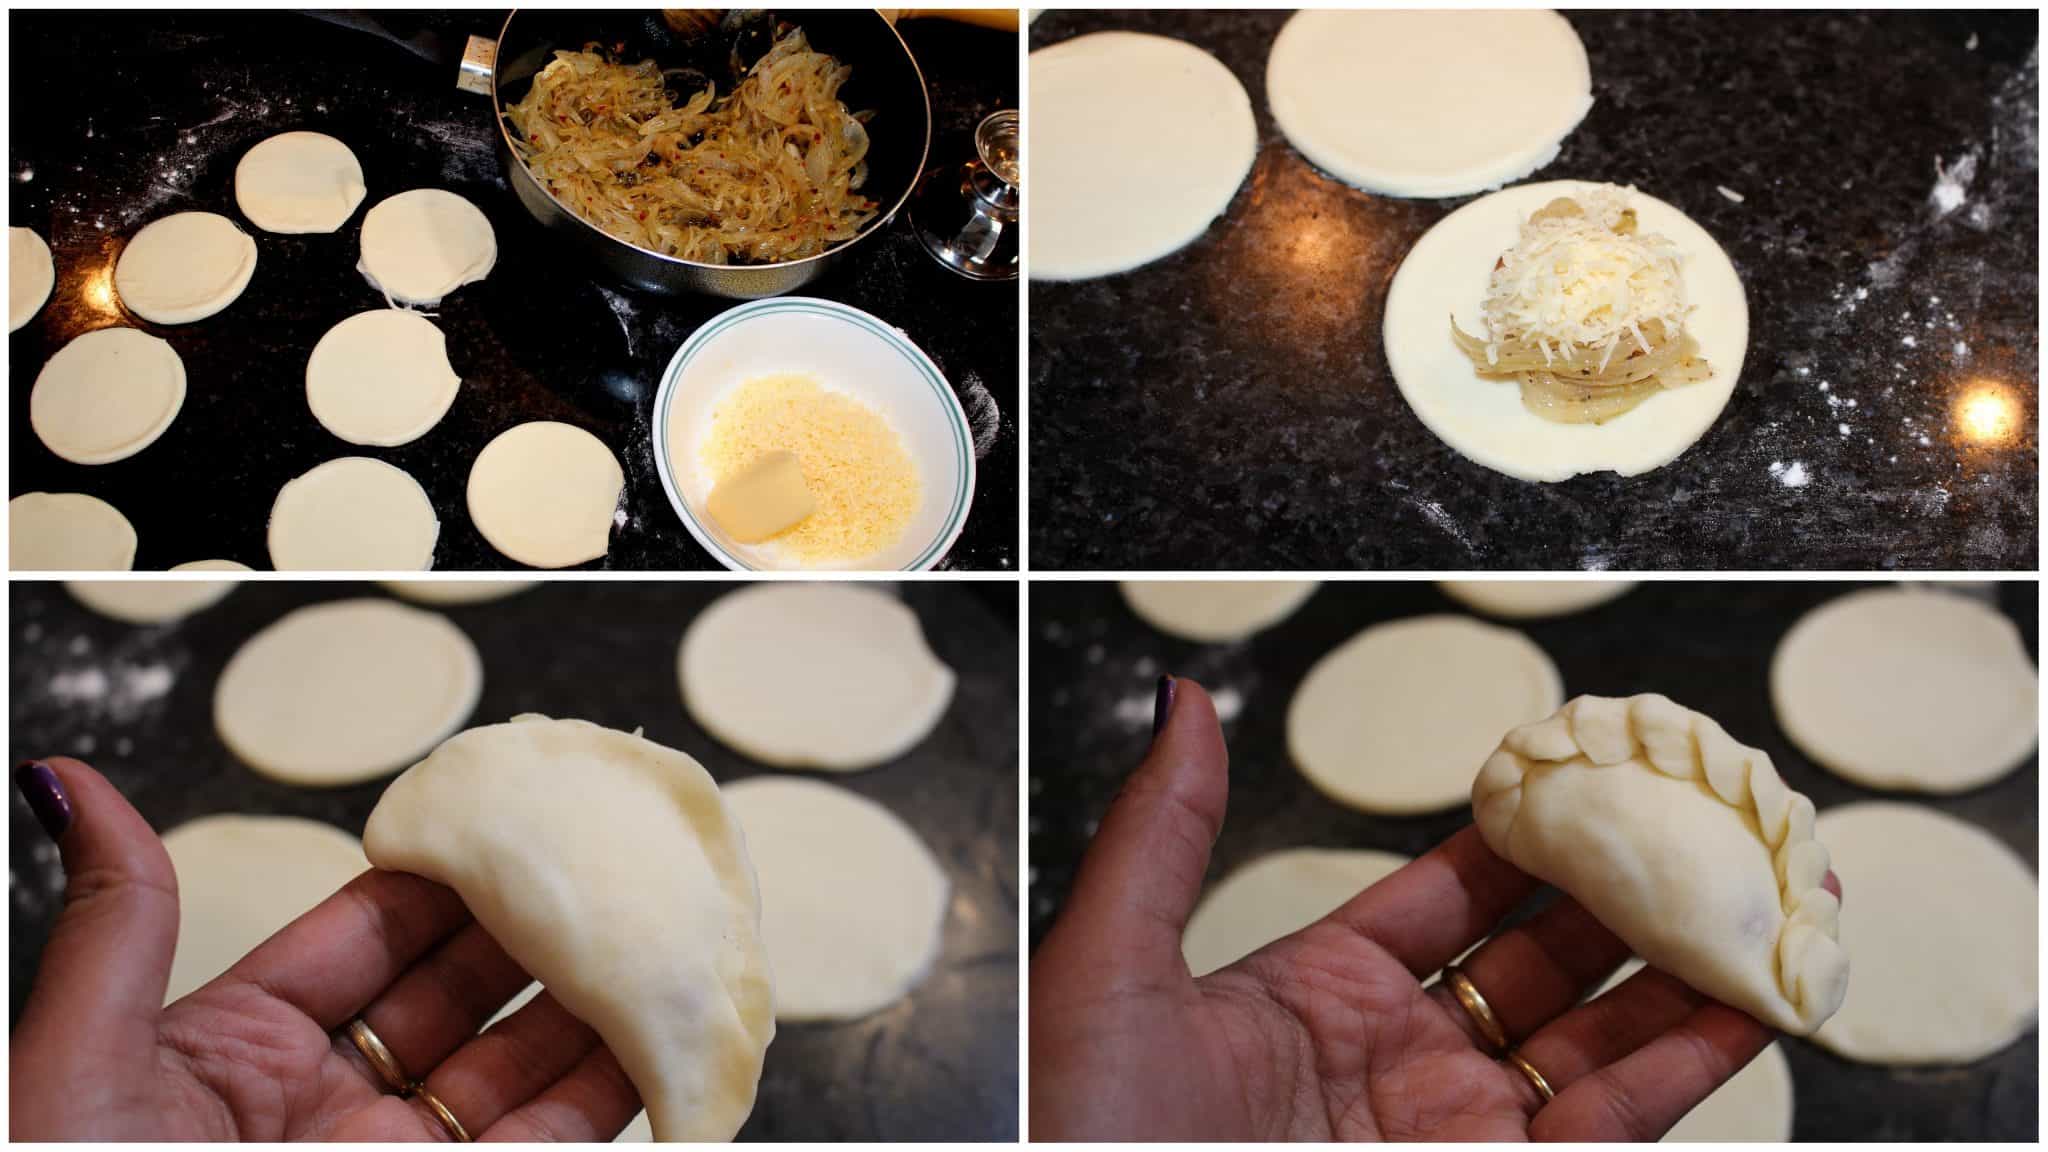 Process shots showing how to roll, cut, fill and seal empanada